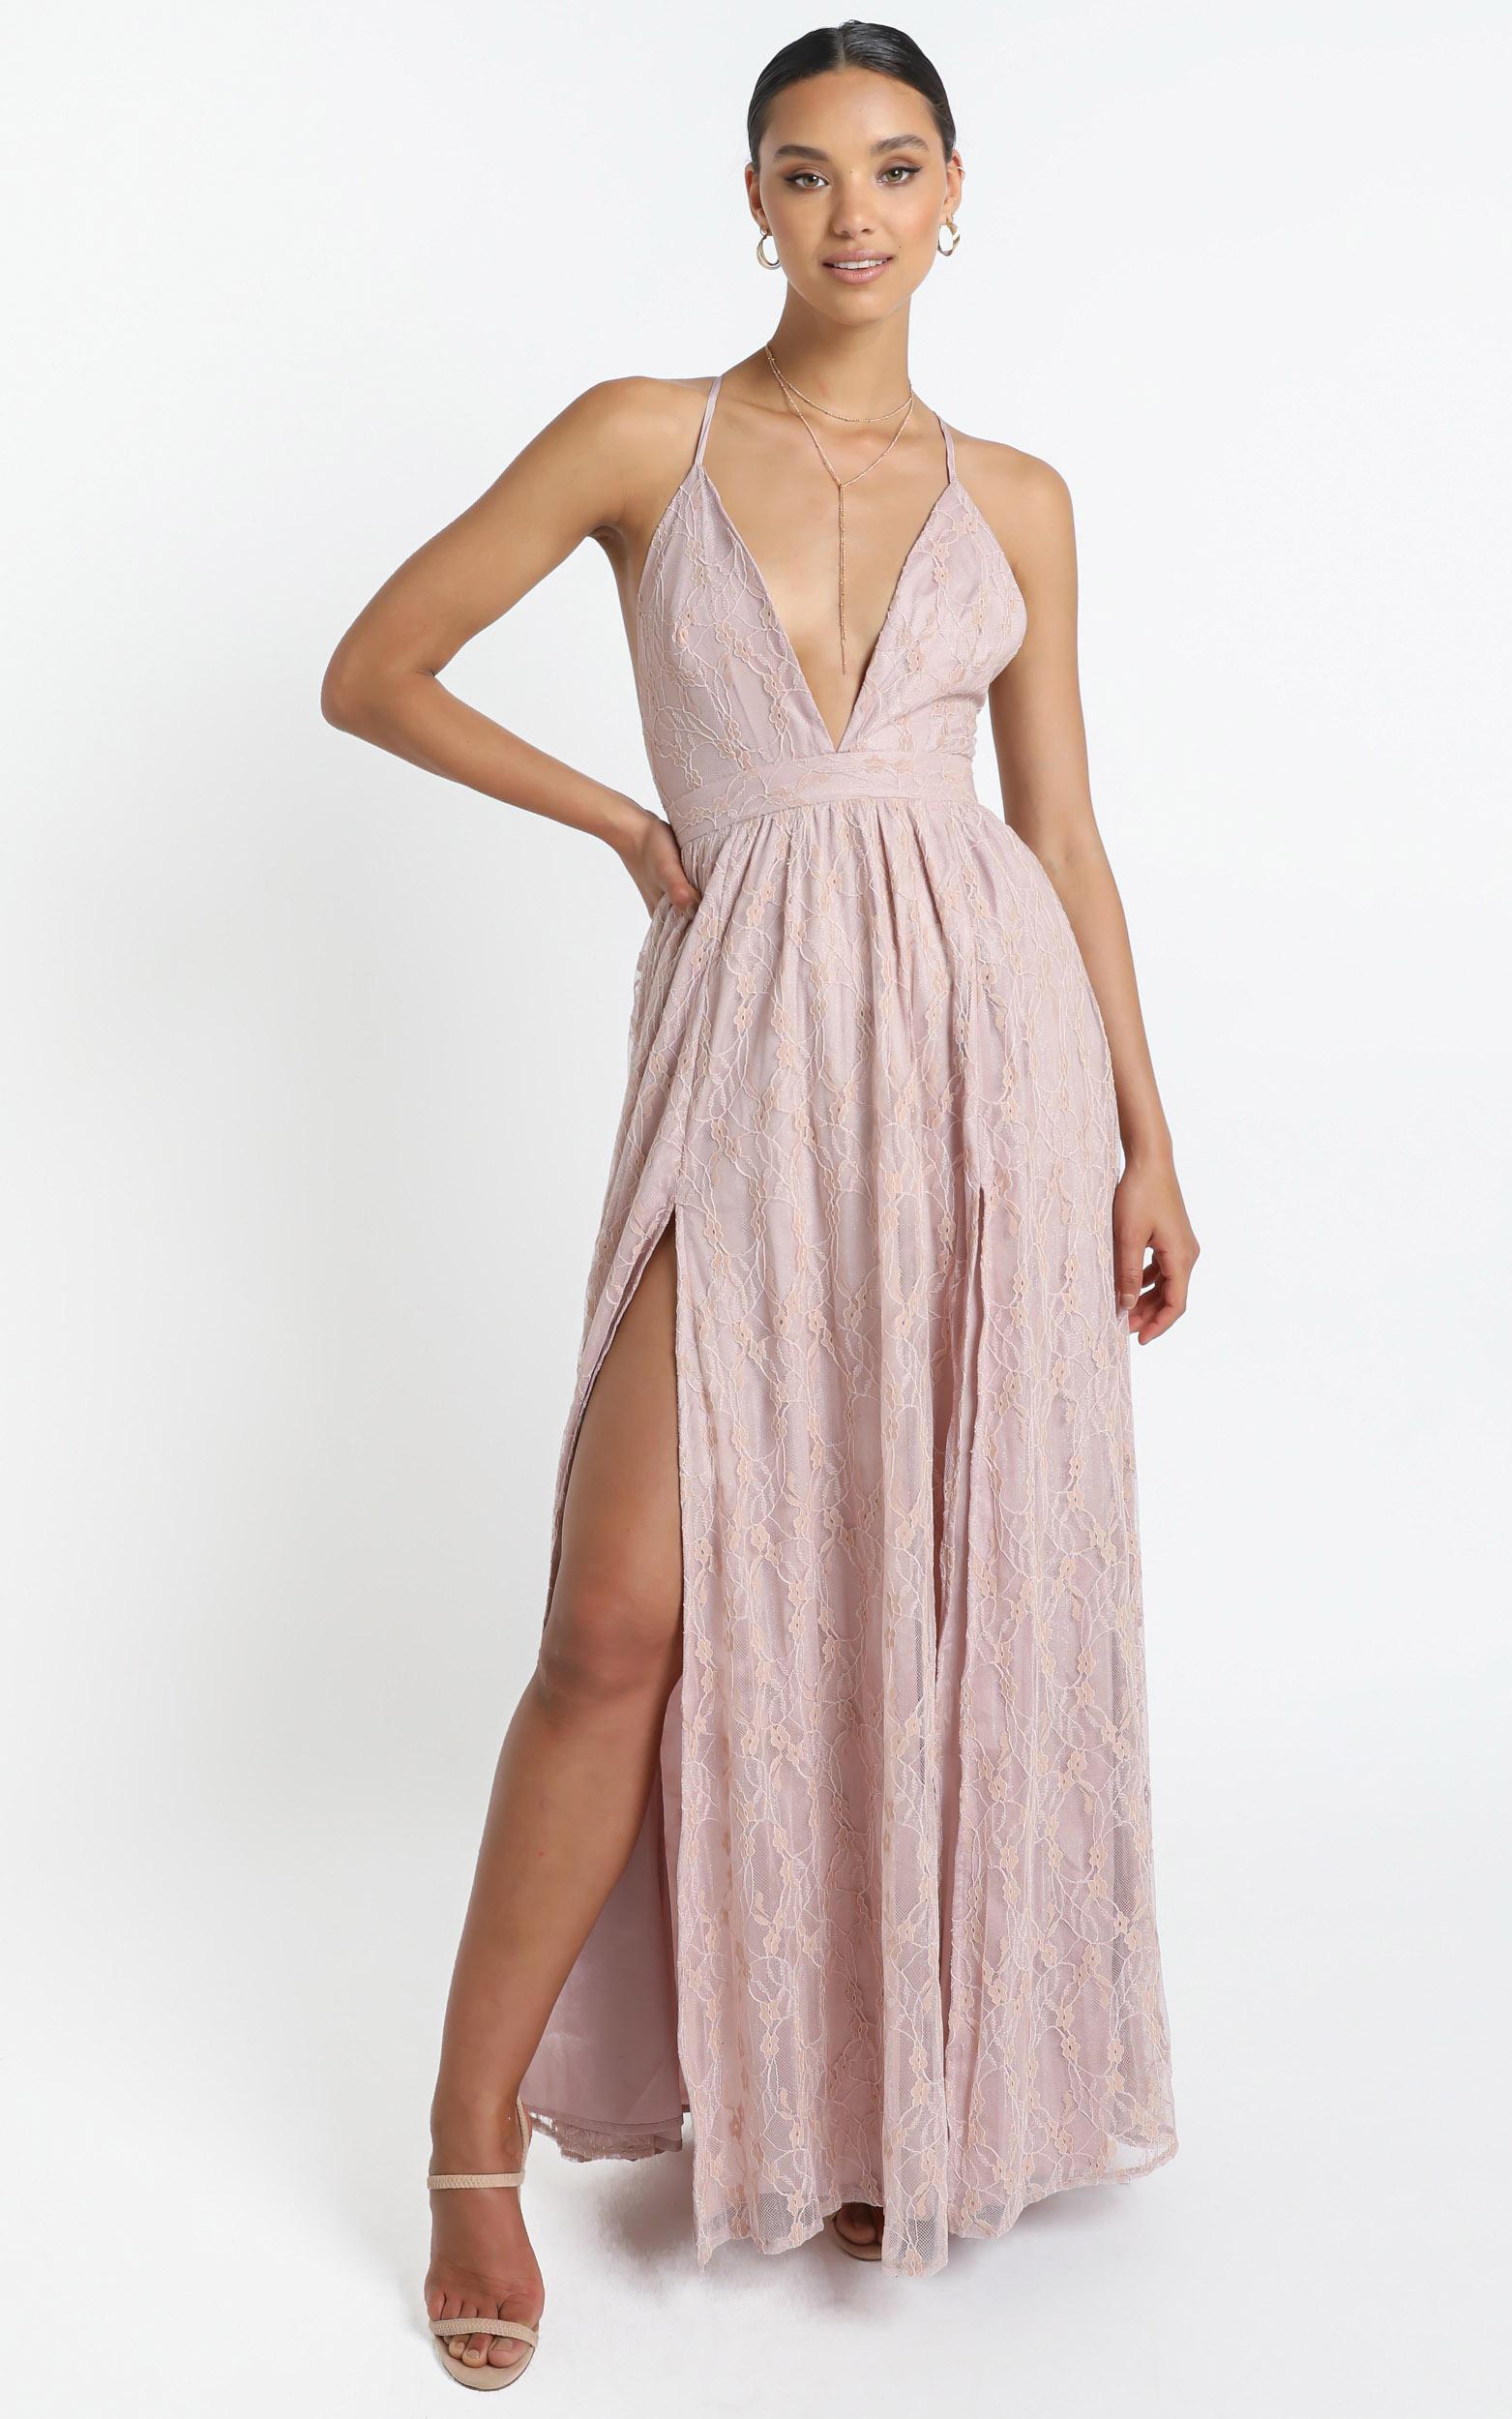 See Some Places Dress in Blush Lace - 20, PNK2, hi-res image number null